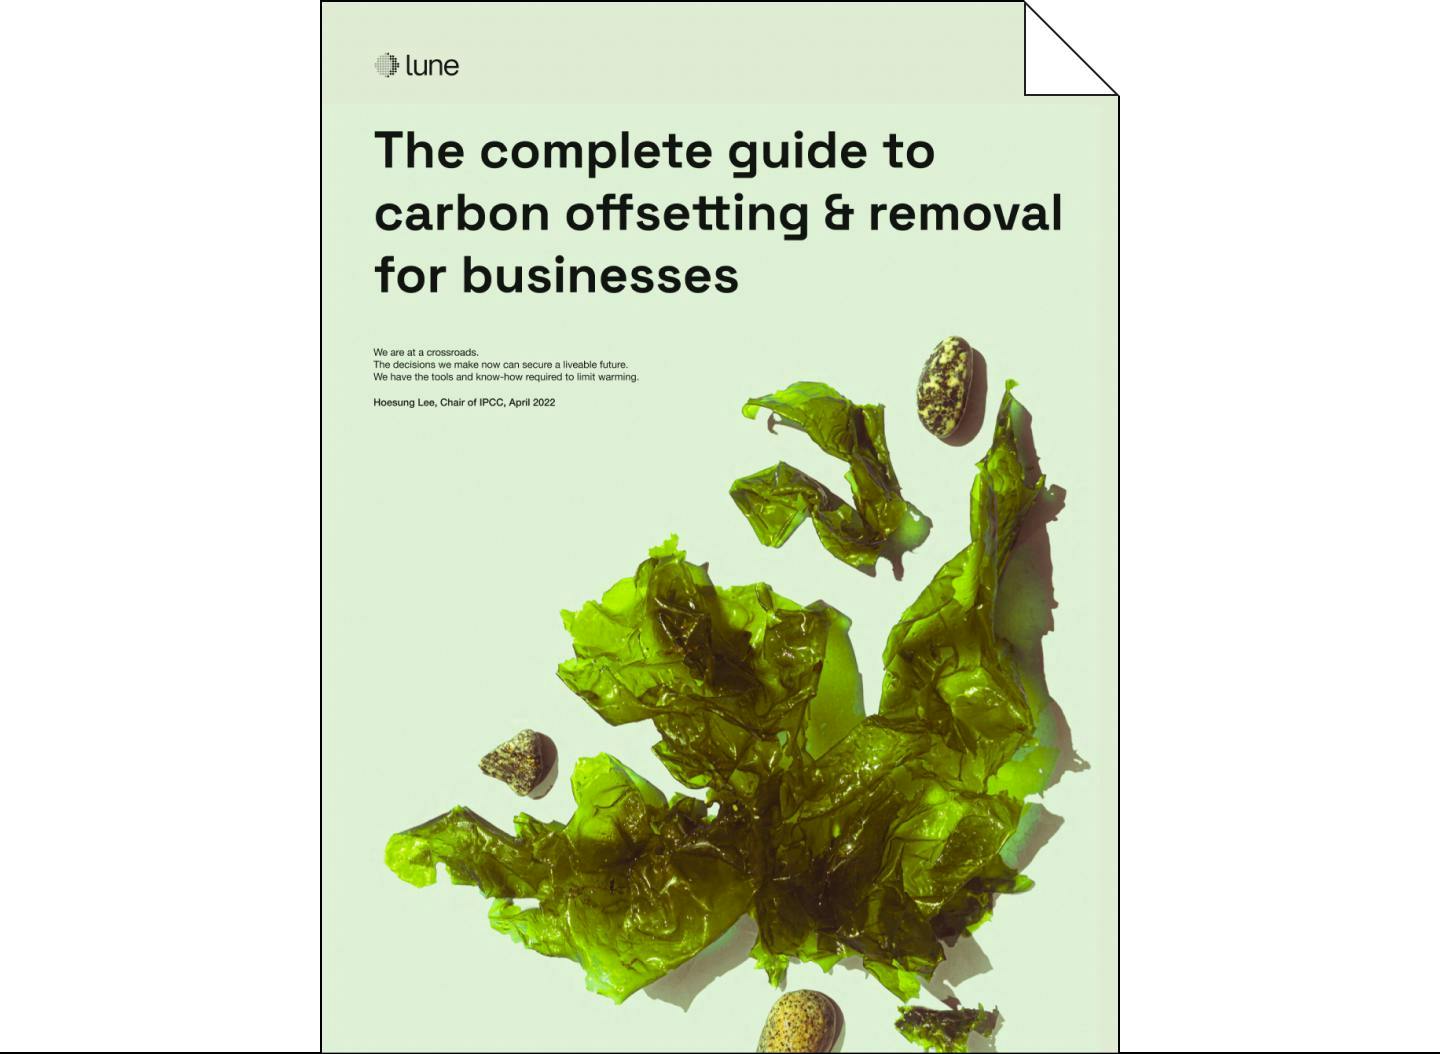 The complete guide to carbon offsetting and removal for businesses – image of the front cover of the guide.